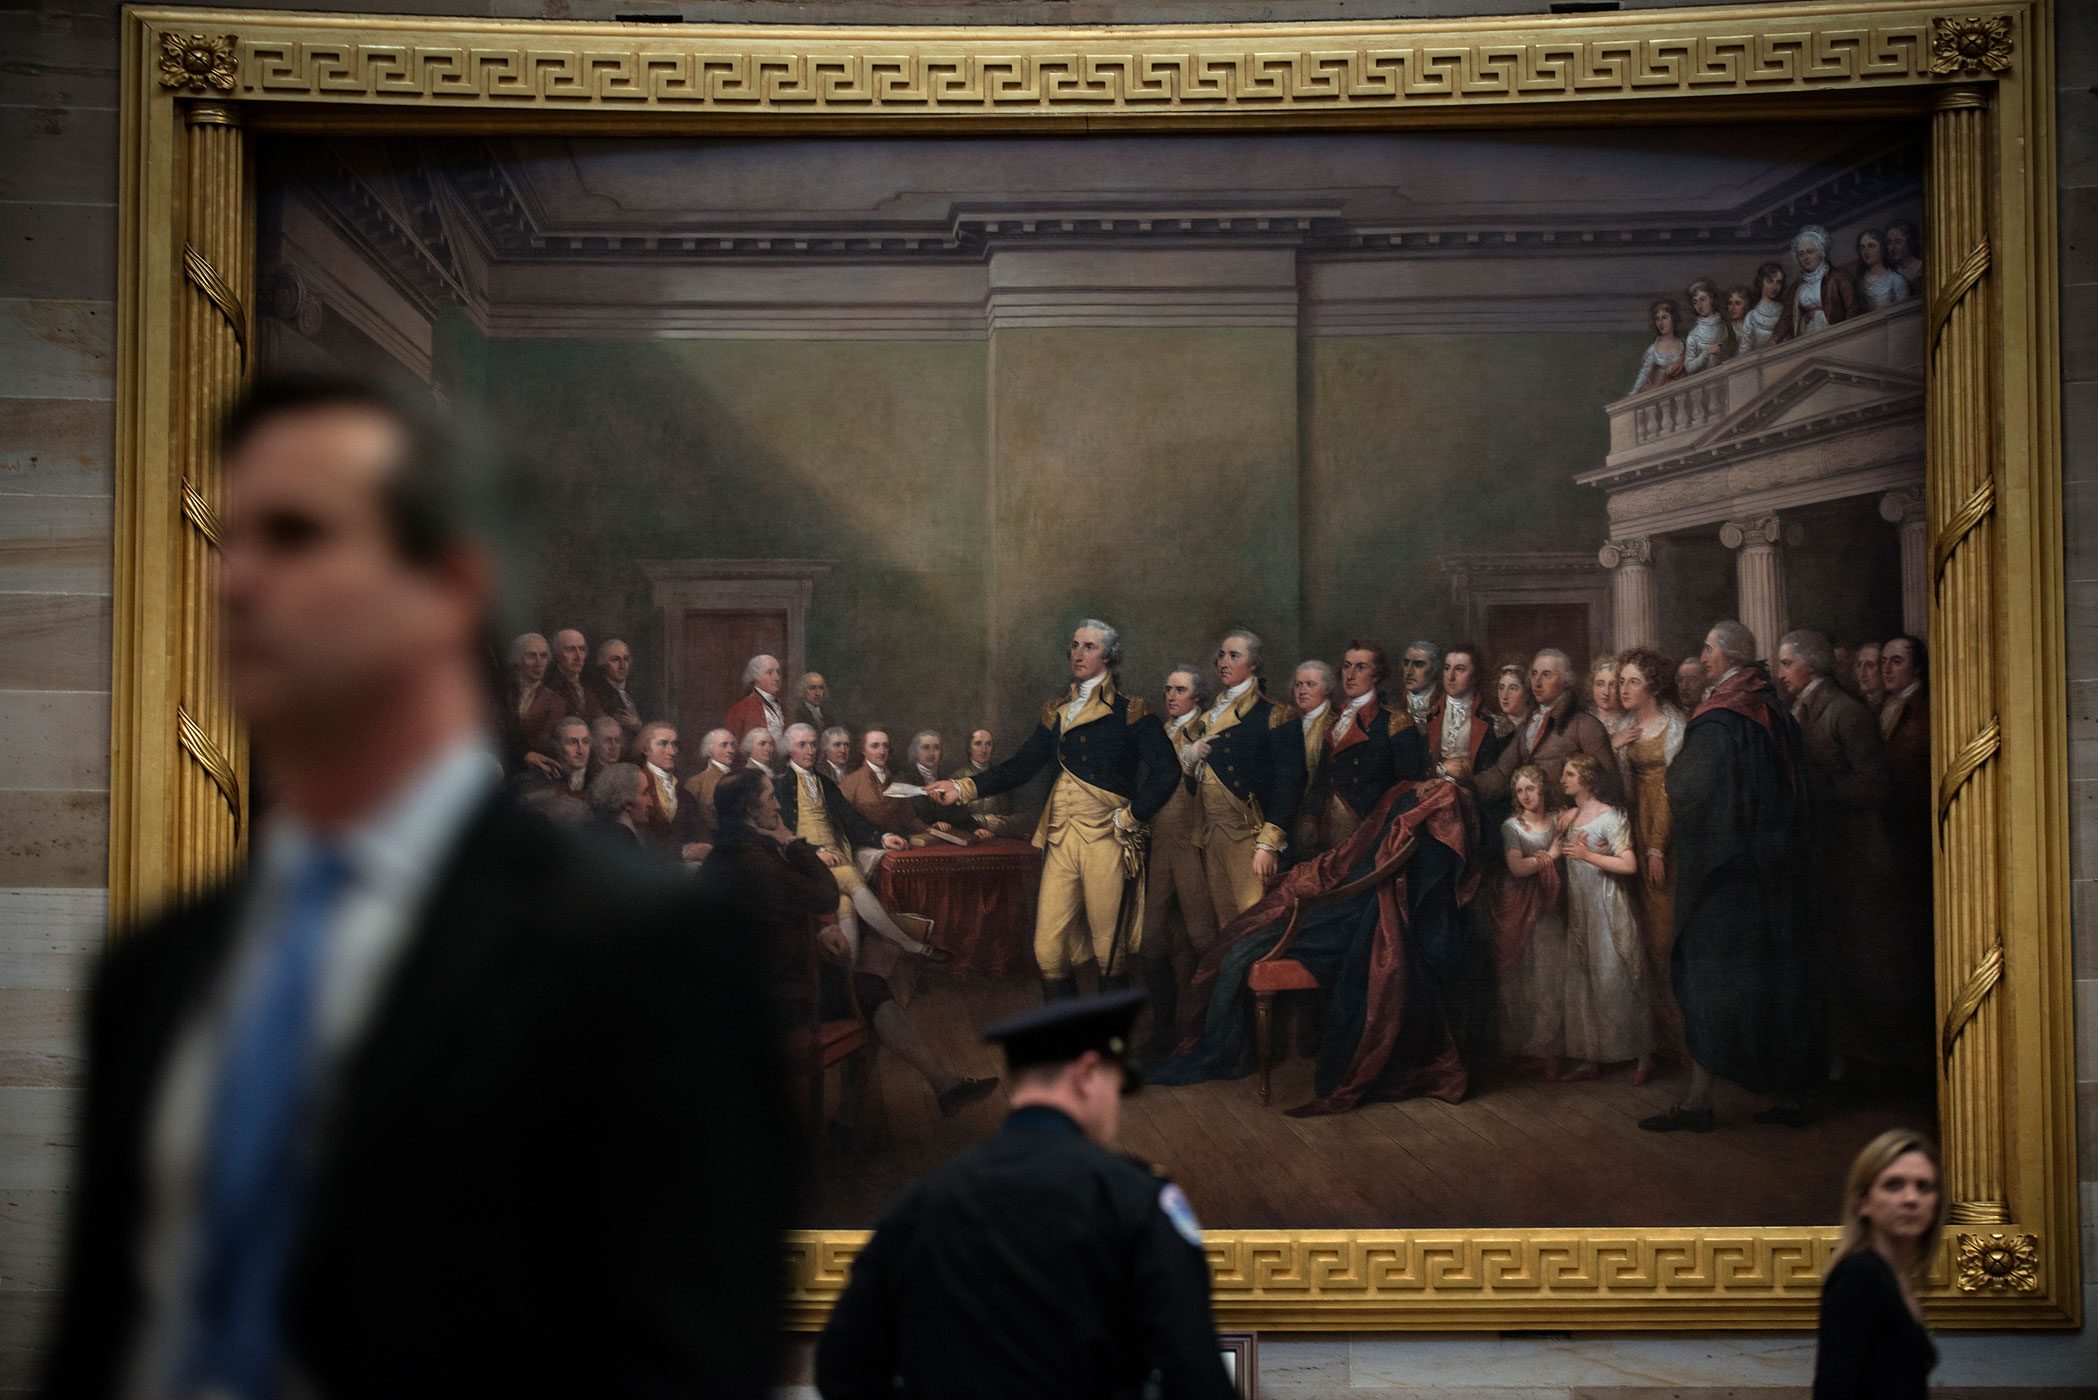 People walk through the Capitol's Rotunda prior to President Obama's State of the Union address to a joint session of the U.S. Congress in Washington, Feb. 12, 2013.